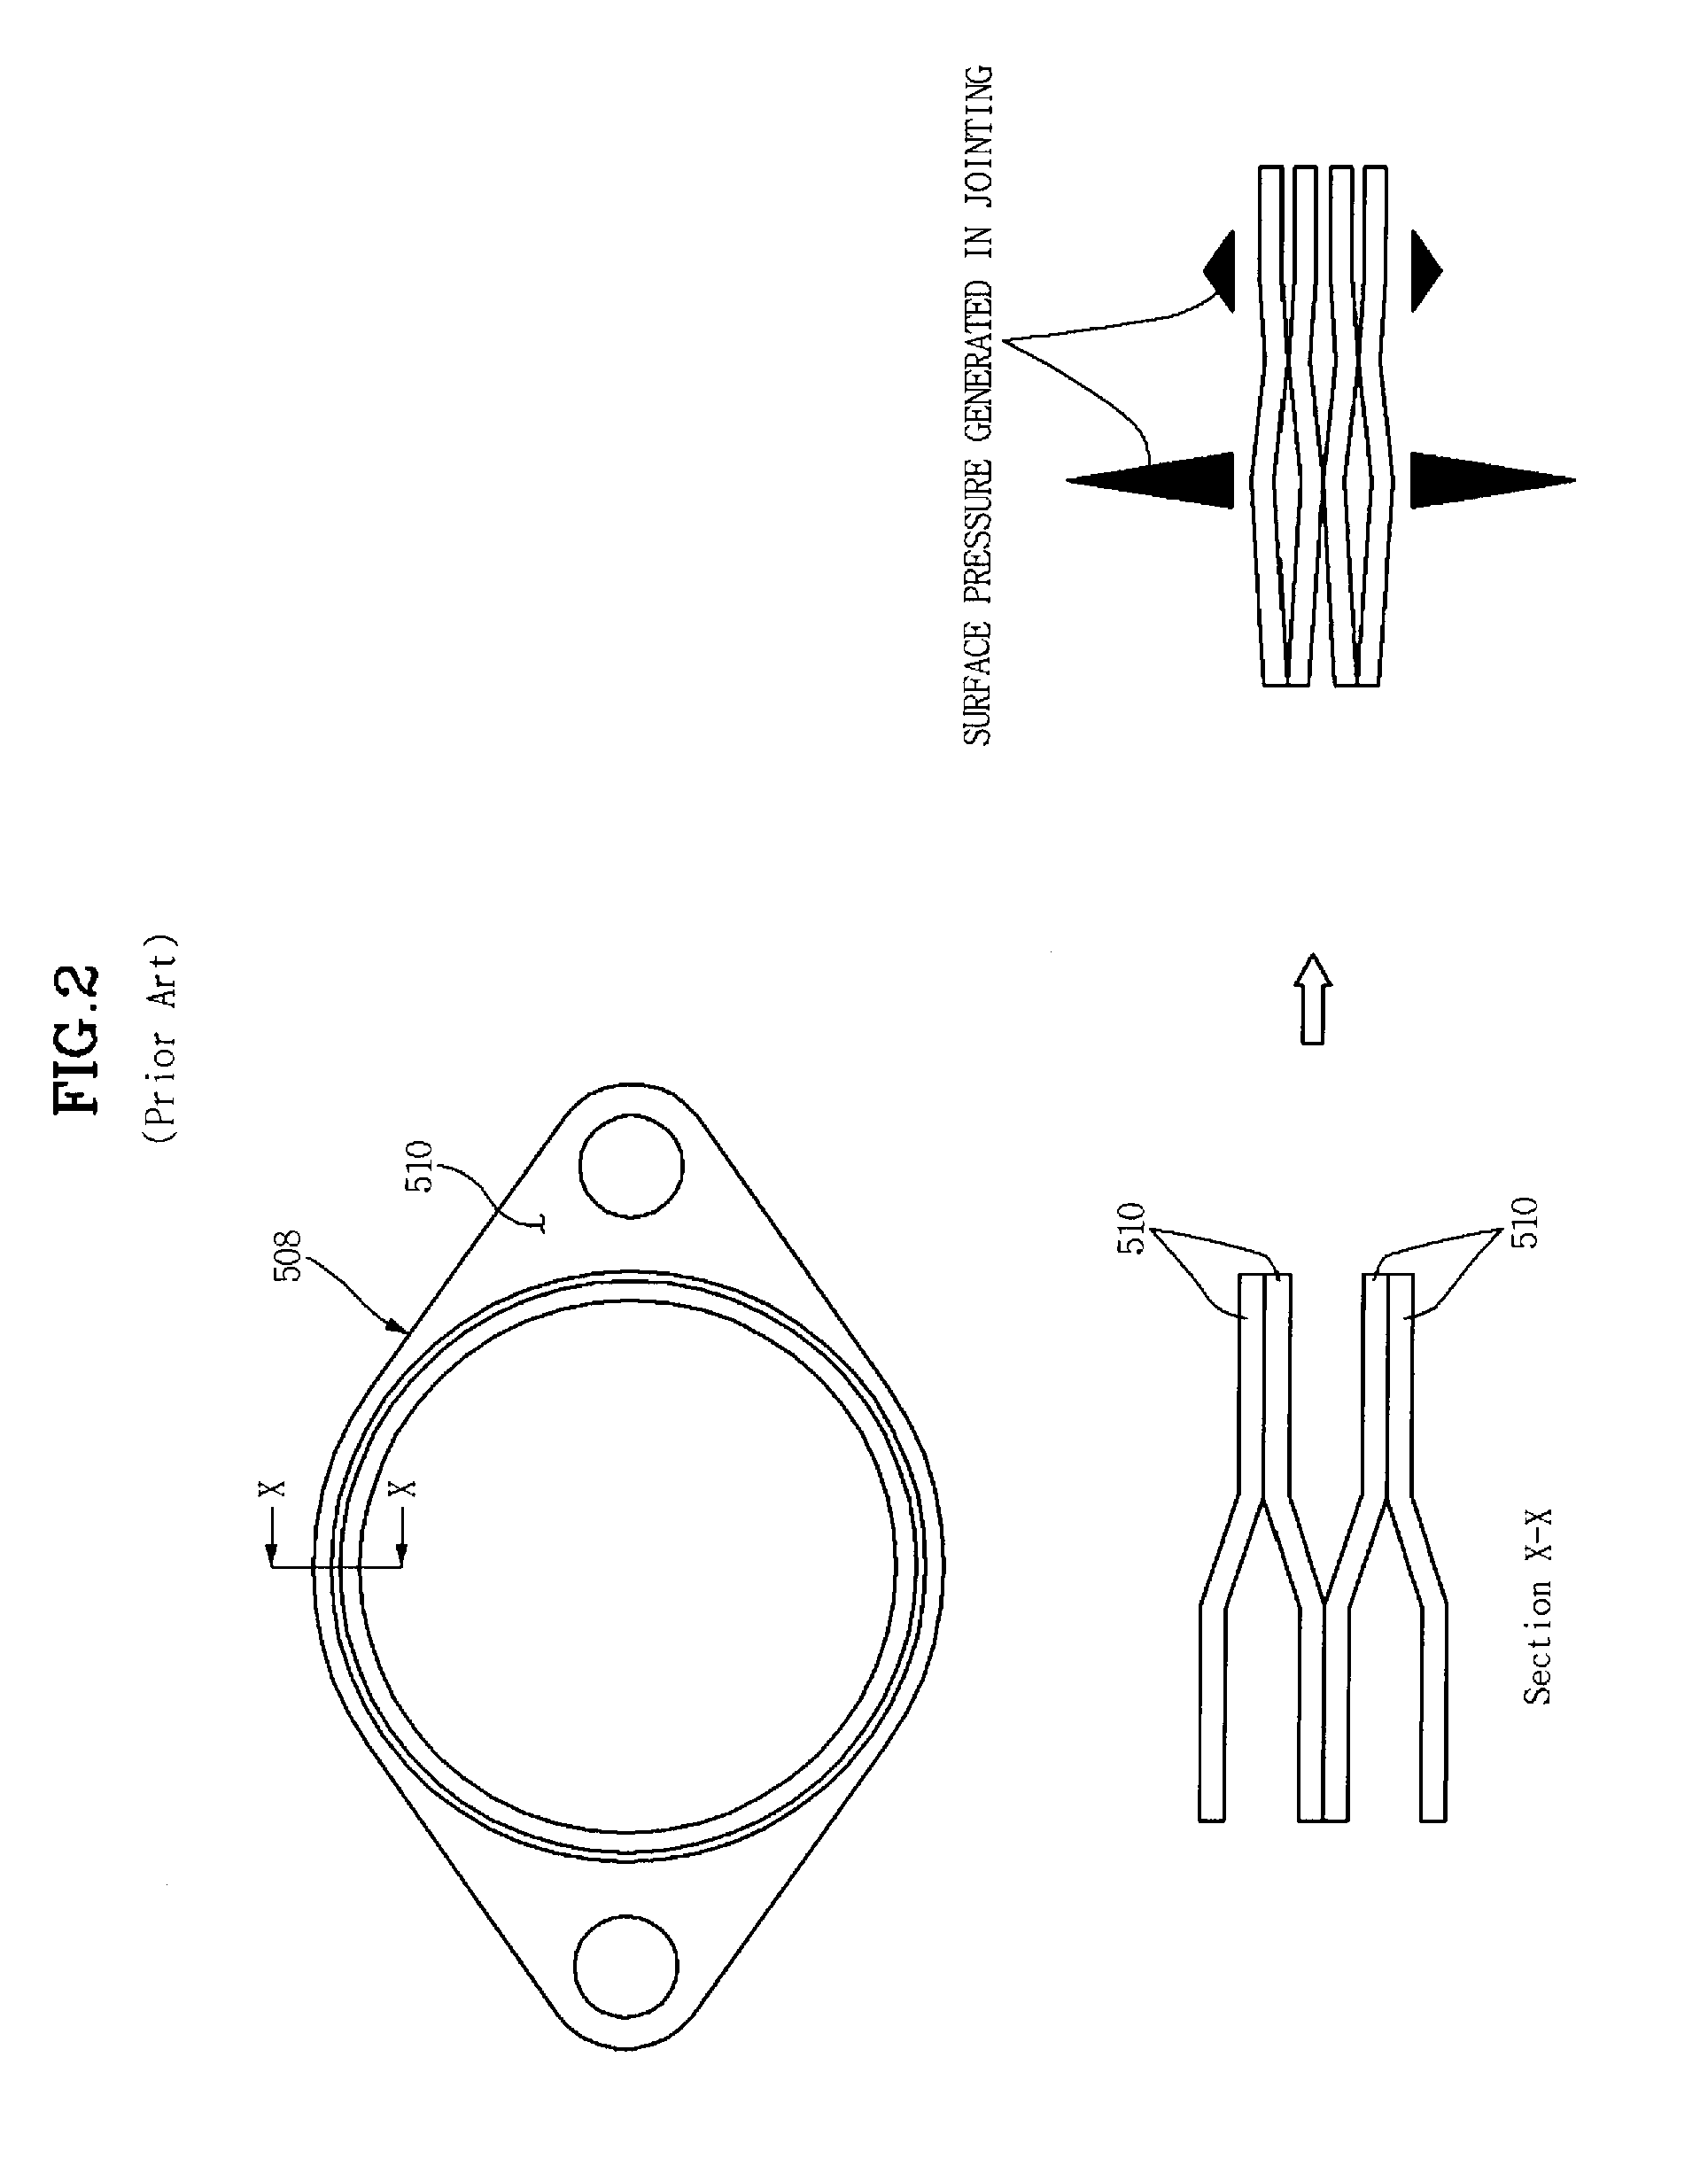 Gasket for exhaust pipe of vehicle